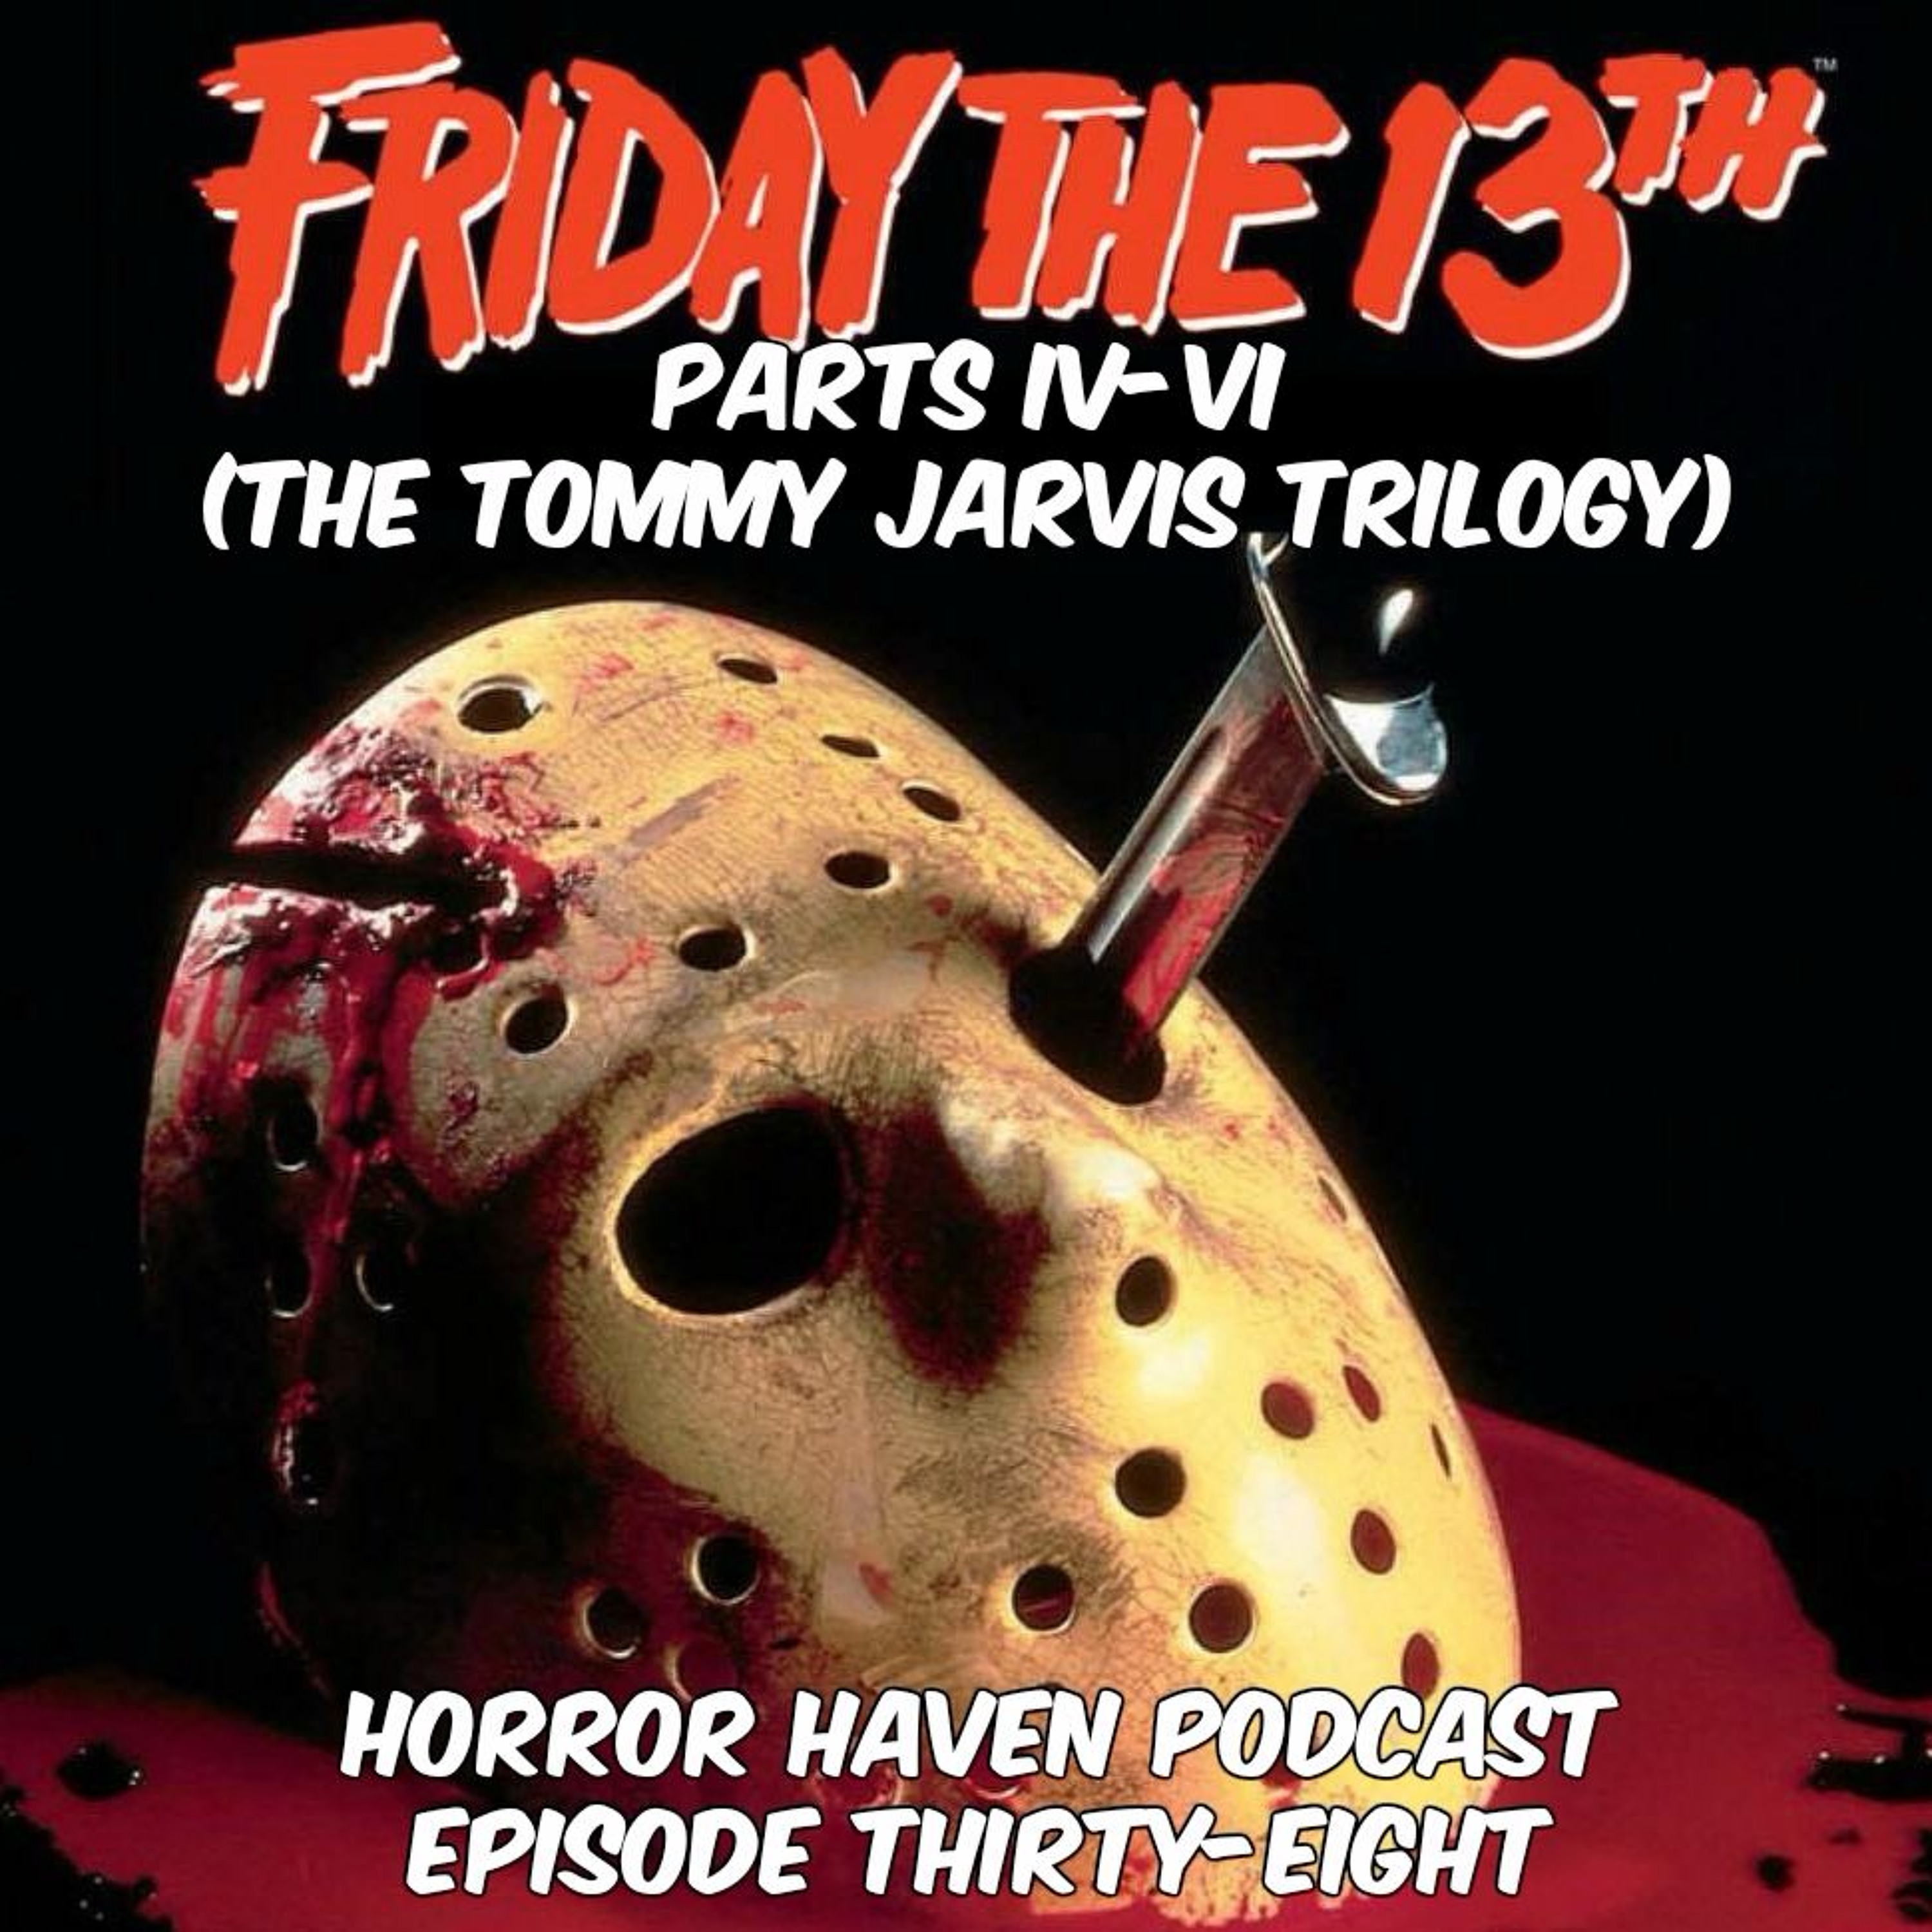 Episode Thirty-Eight:  Friday the 13th Parts IV-VI (The Tommy Jarvis Trilogy)